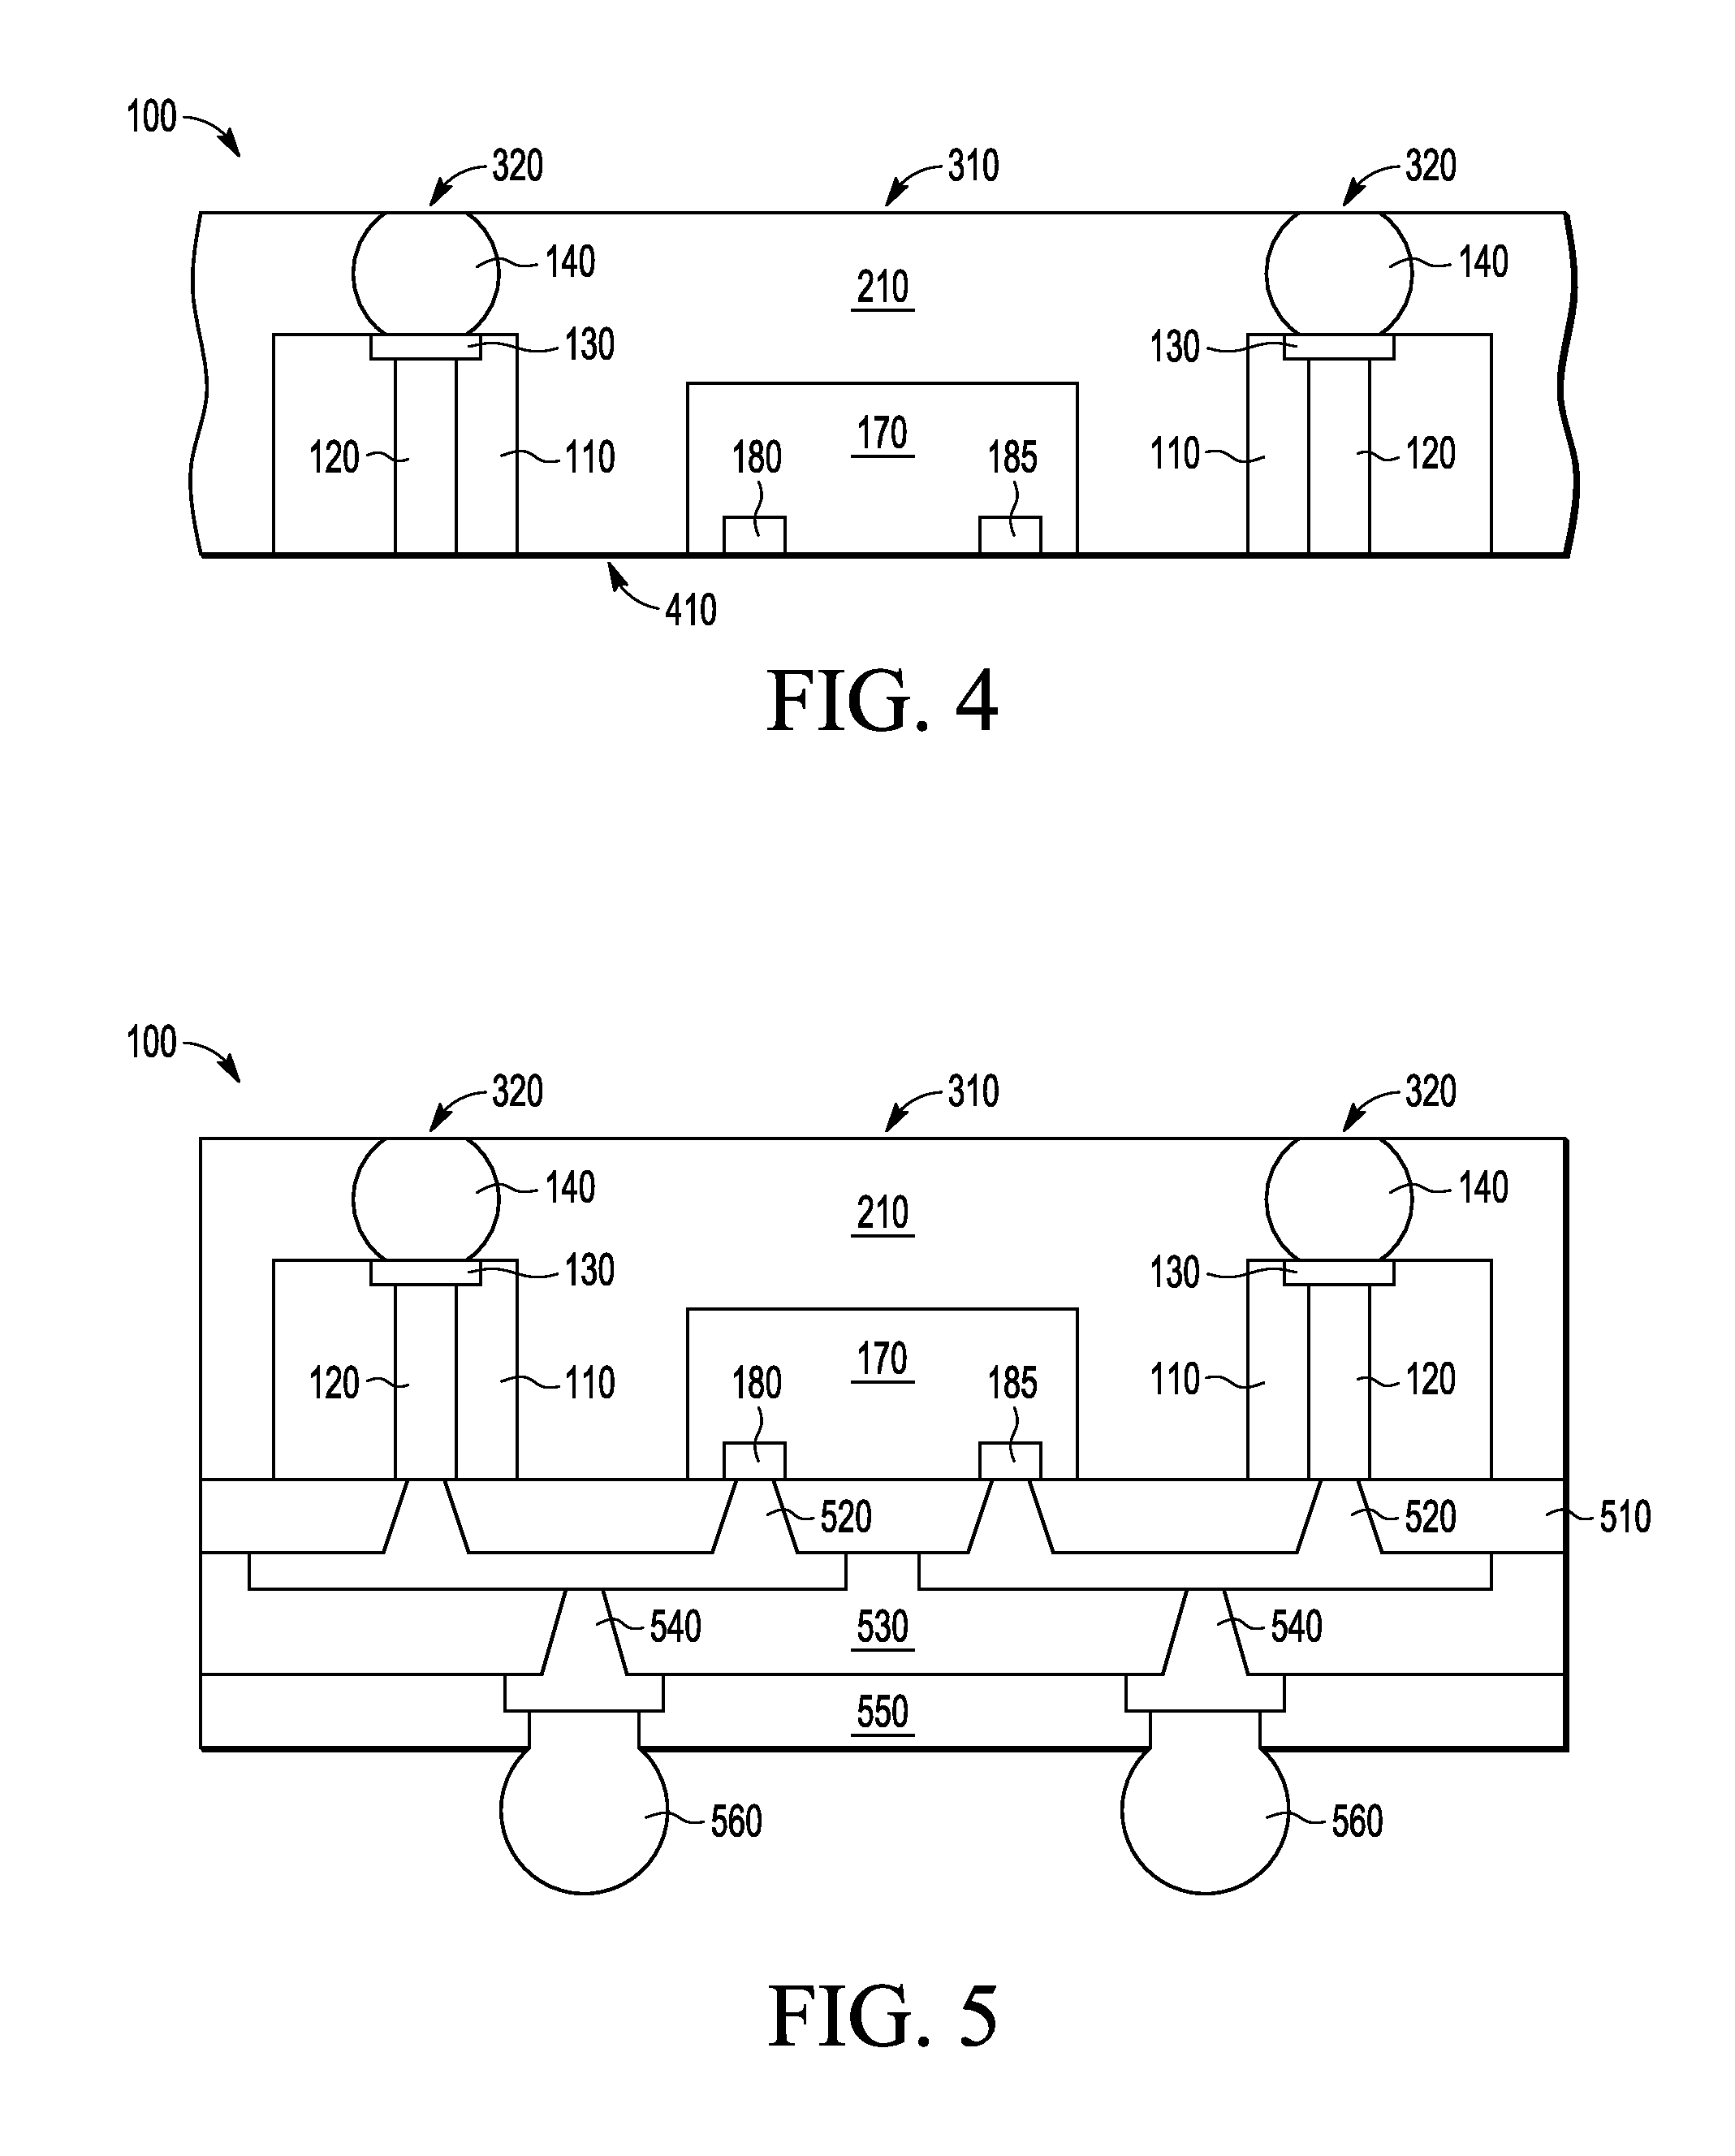 Semiconductor device packaging using encapsulated conductive balls for package-on-package back side coupling